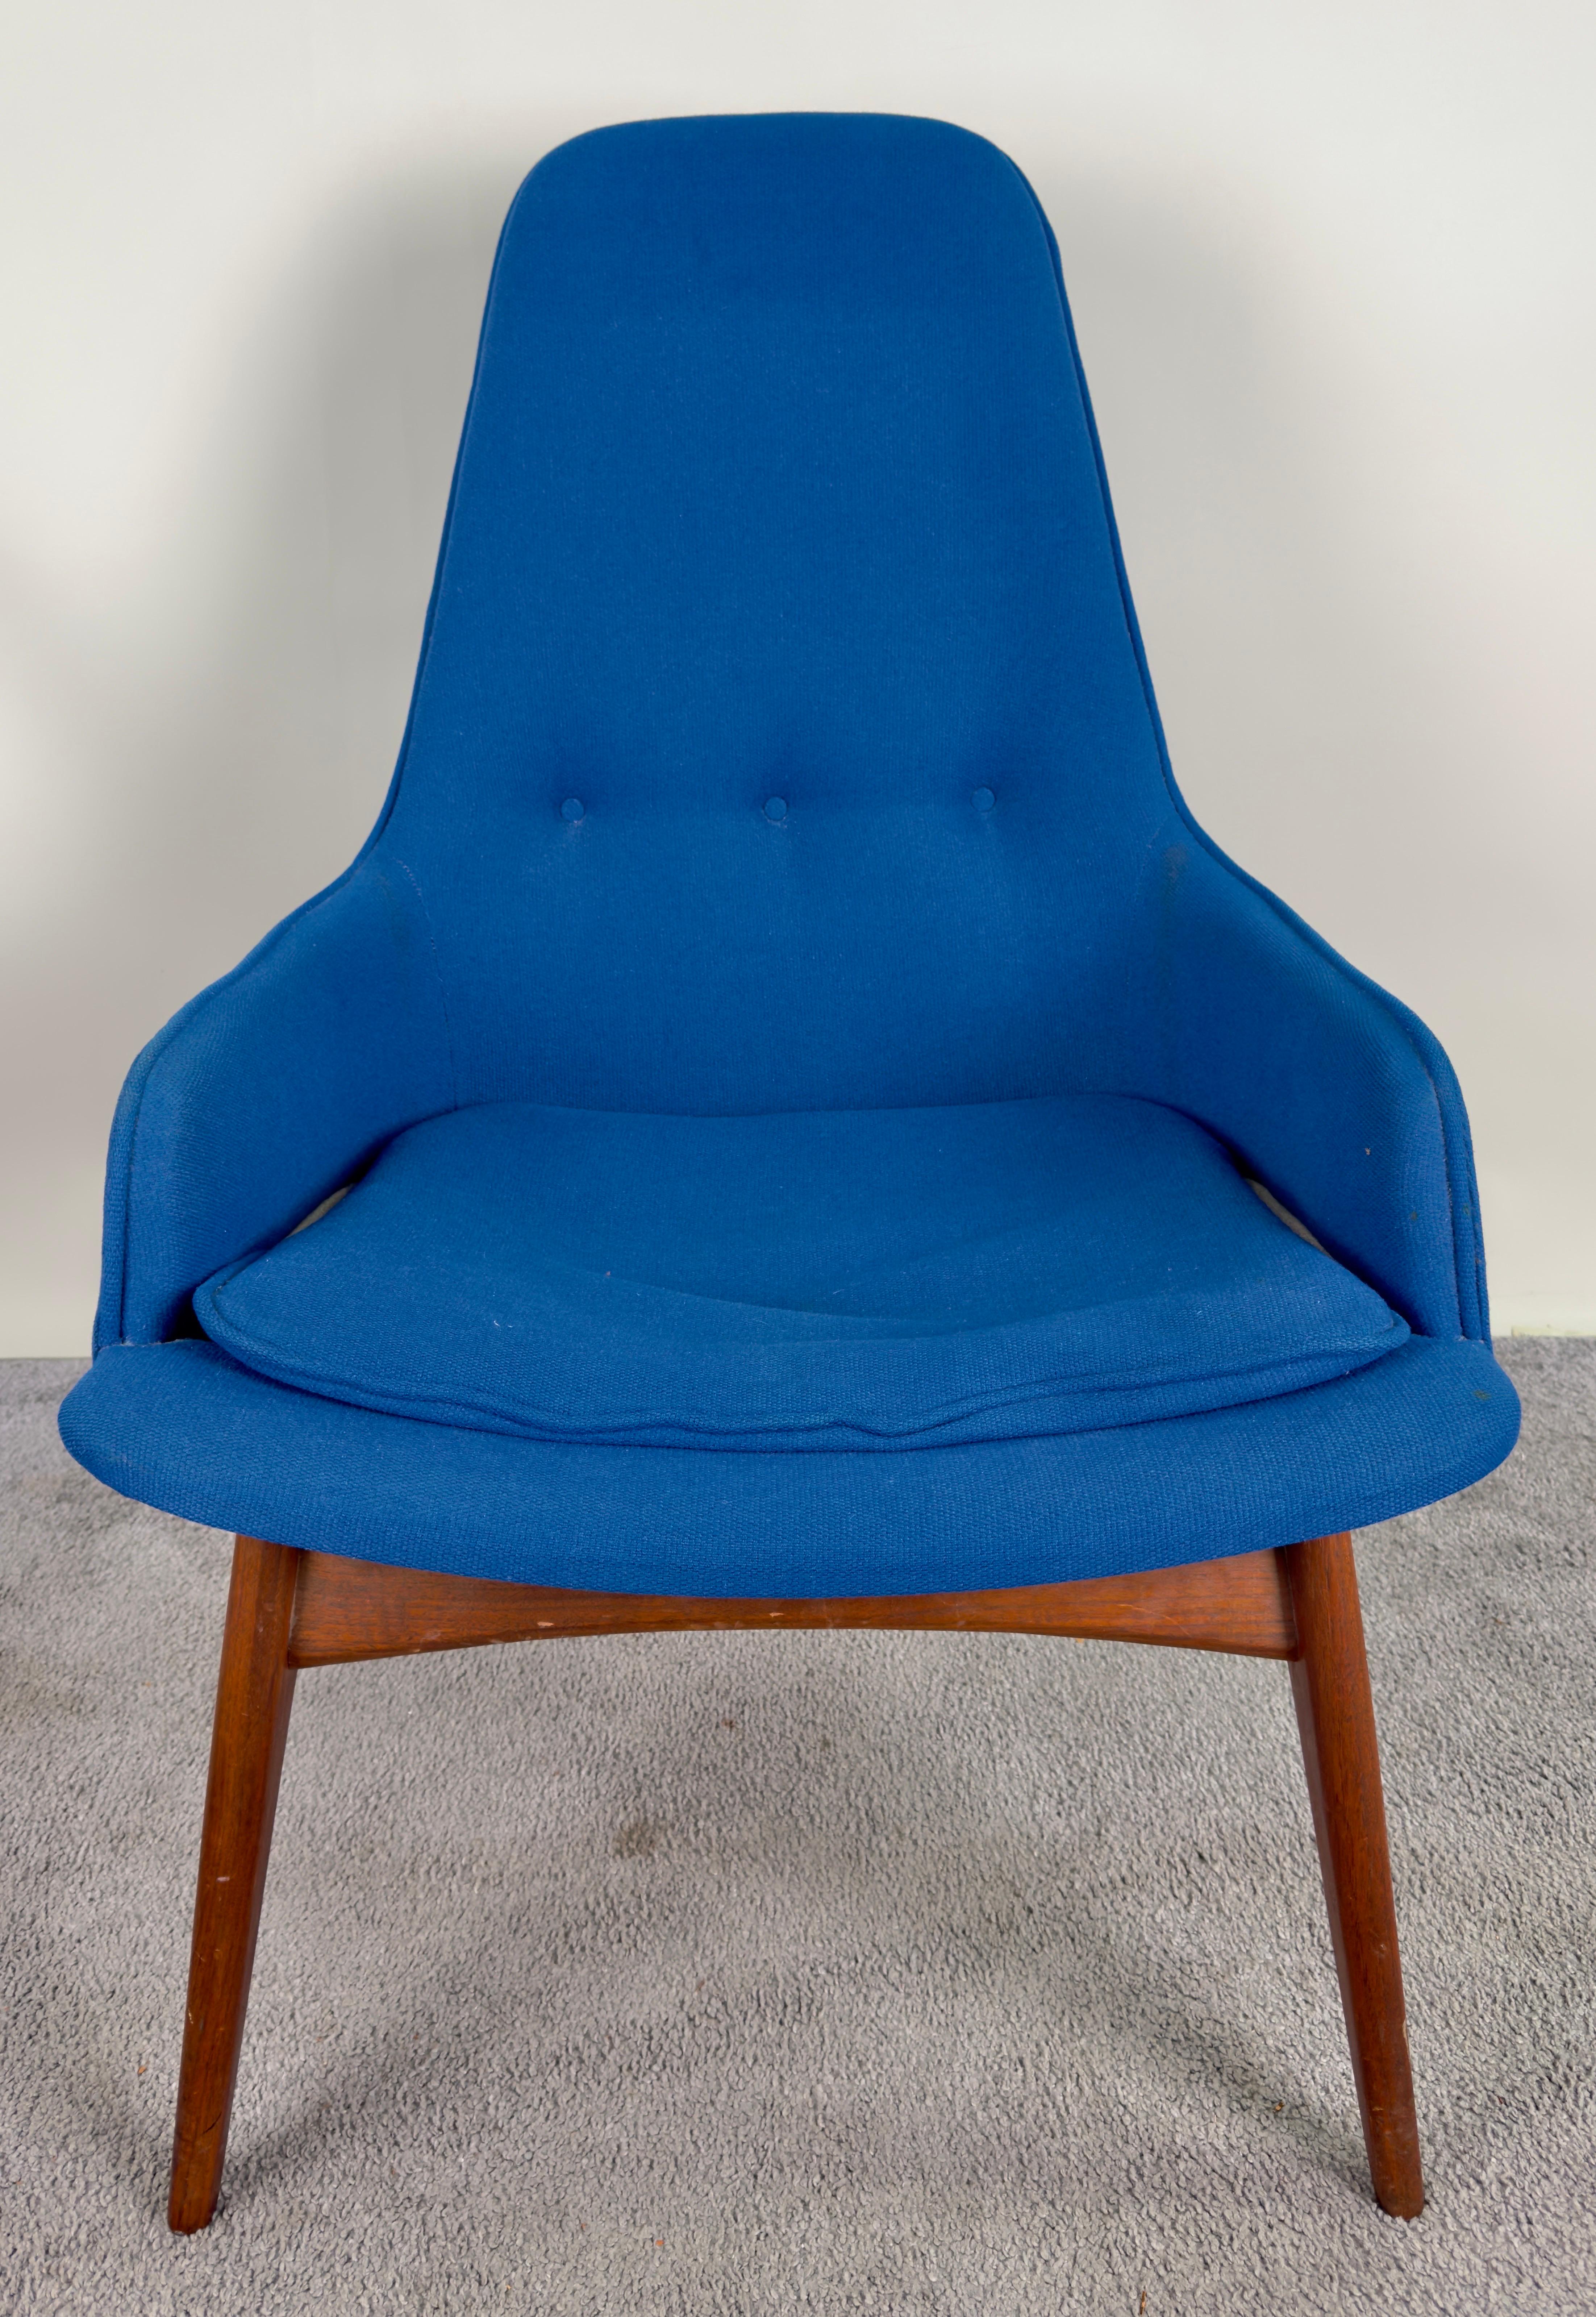 A Mid Century Modern Scandinavian barrel armchair. Crafted with meticulous attention to detail, this chair boasts a frame fashioned from the finest walnut, ensuring both durability and timeless elegance. Its upholstery, resplendent in cobalt blue is